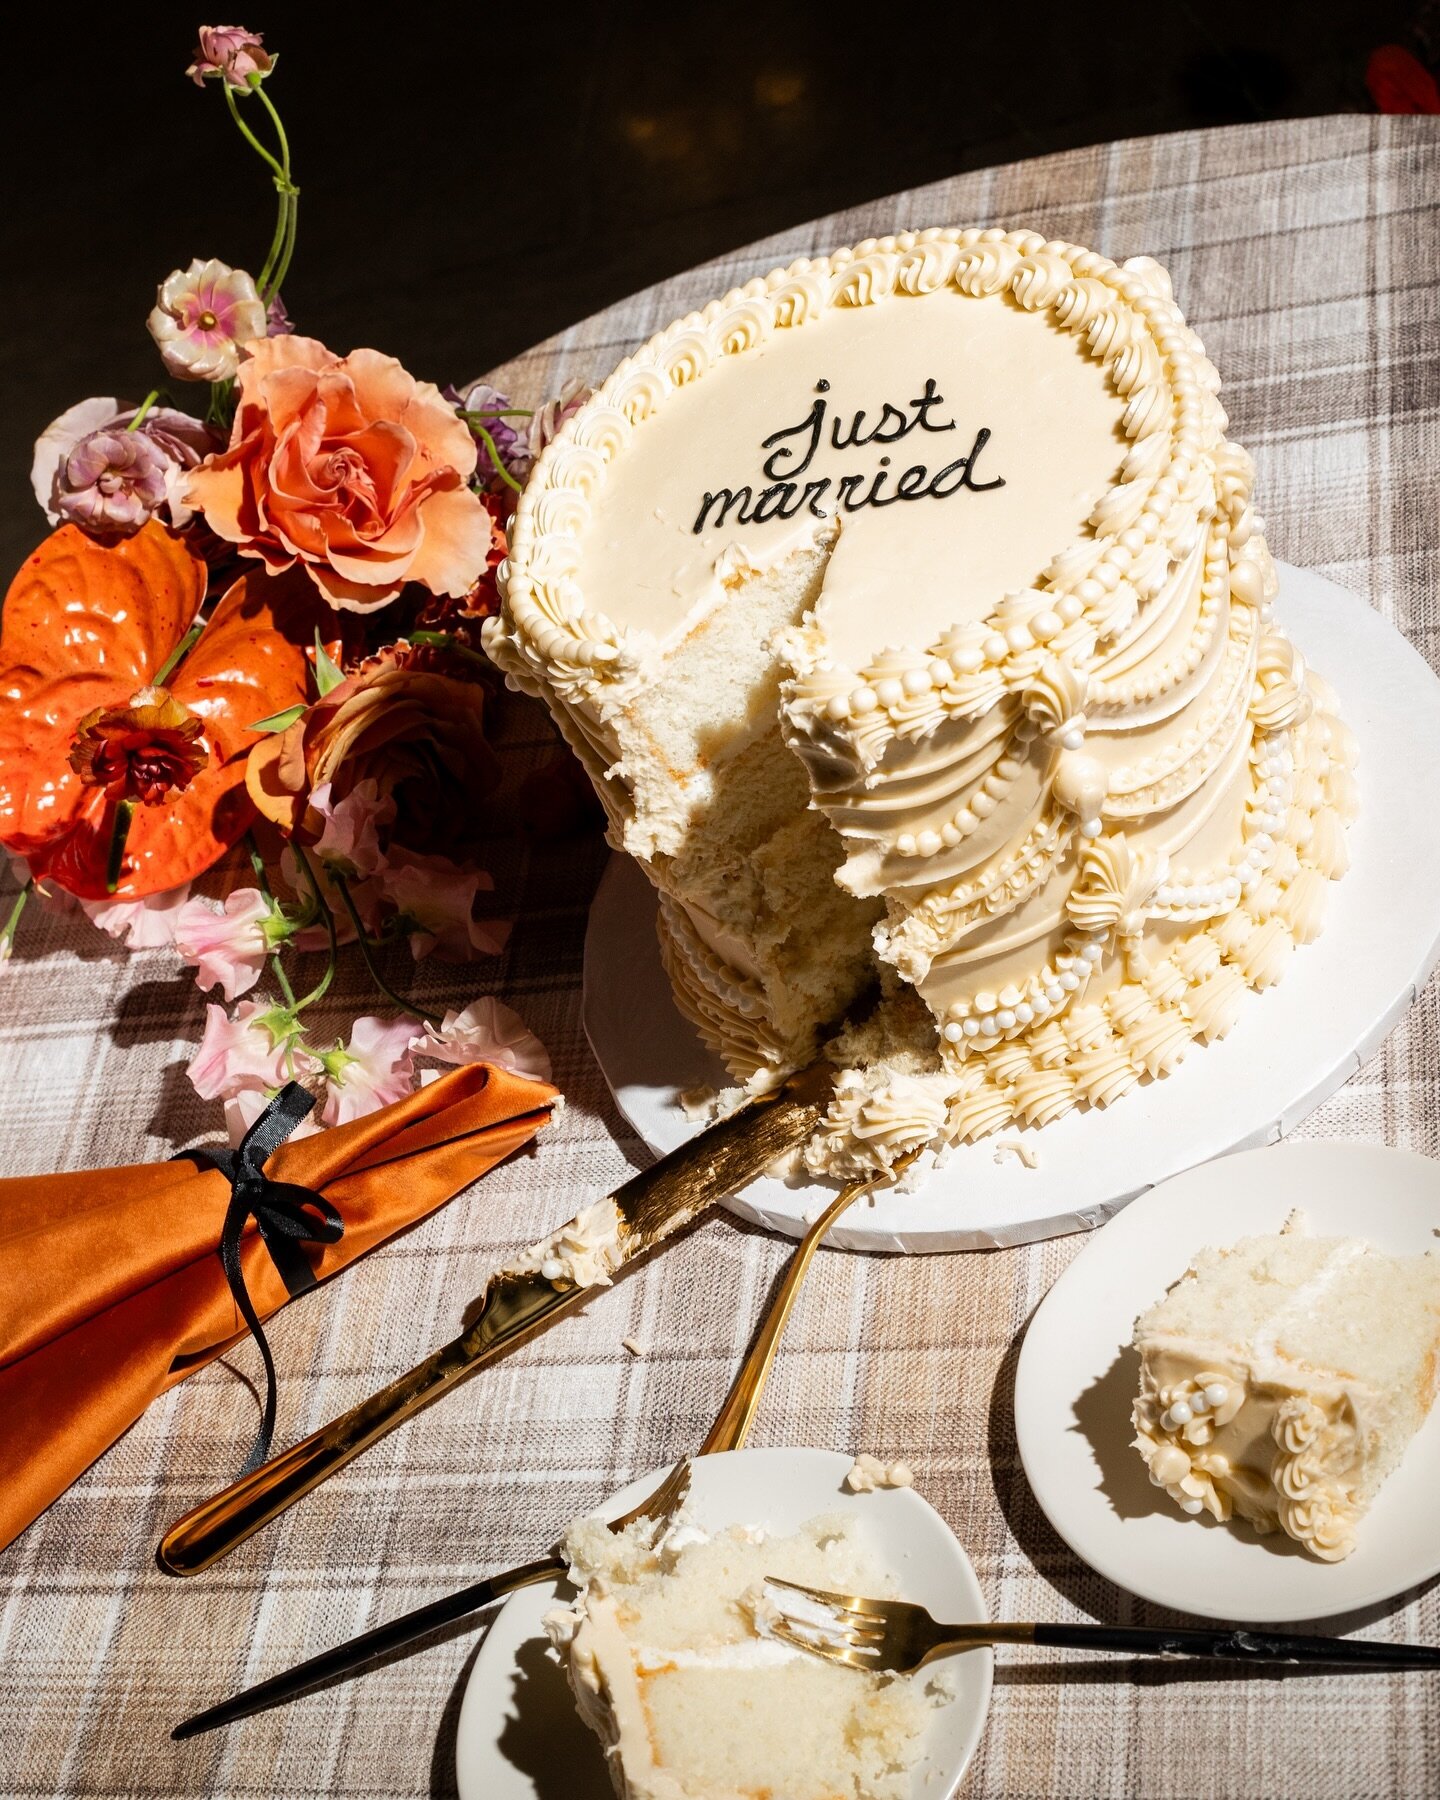 Our favorite shot? A messy cake shot of course! There is something so imperfectly perfect about capturing the wedding cake after our newlyweds dig in and are off to breaking it down on the dance floor. 

Perfectly imperfect moments are what weddings 